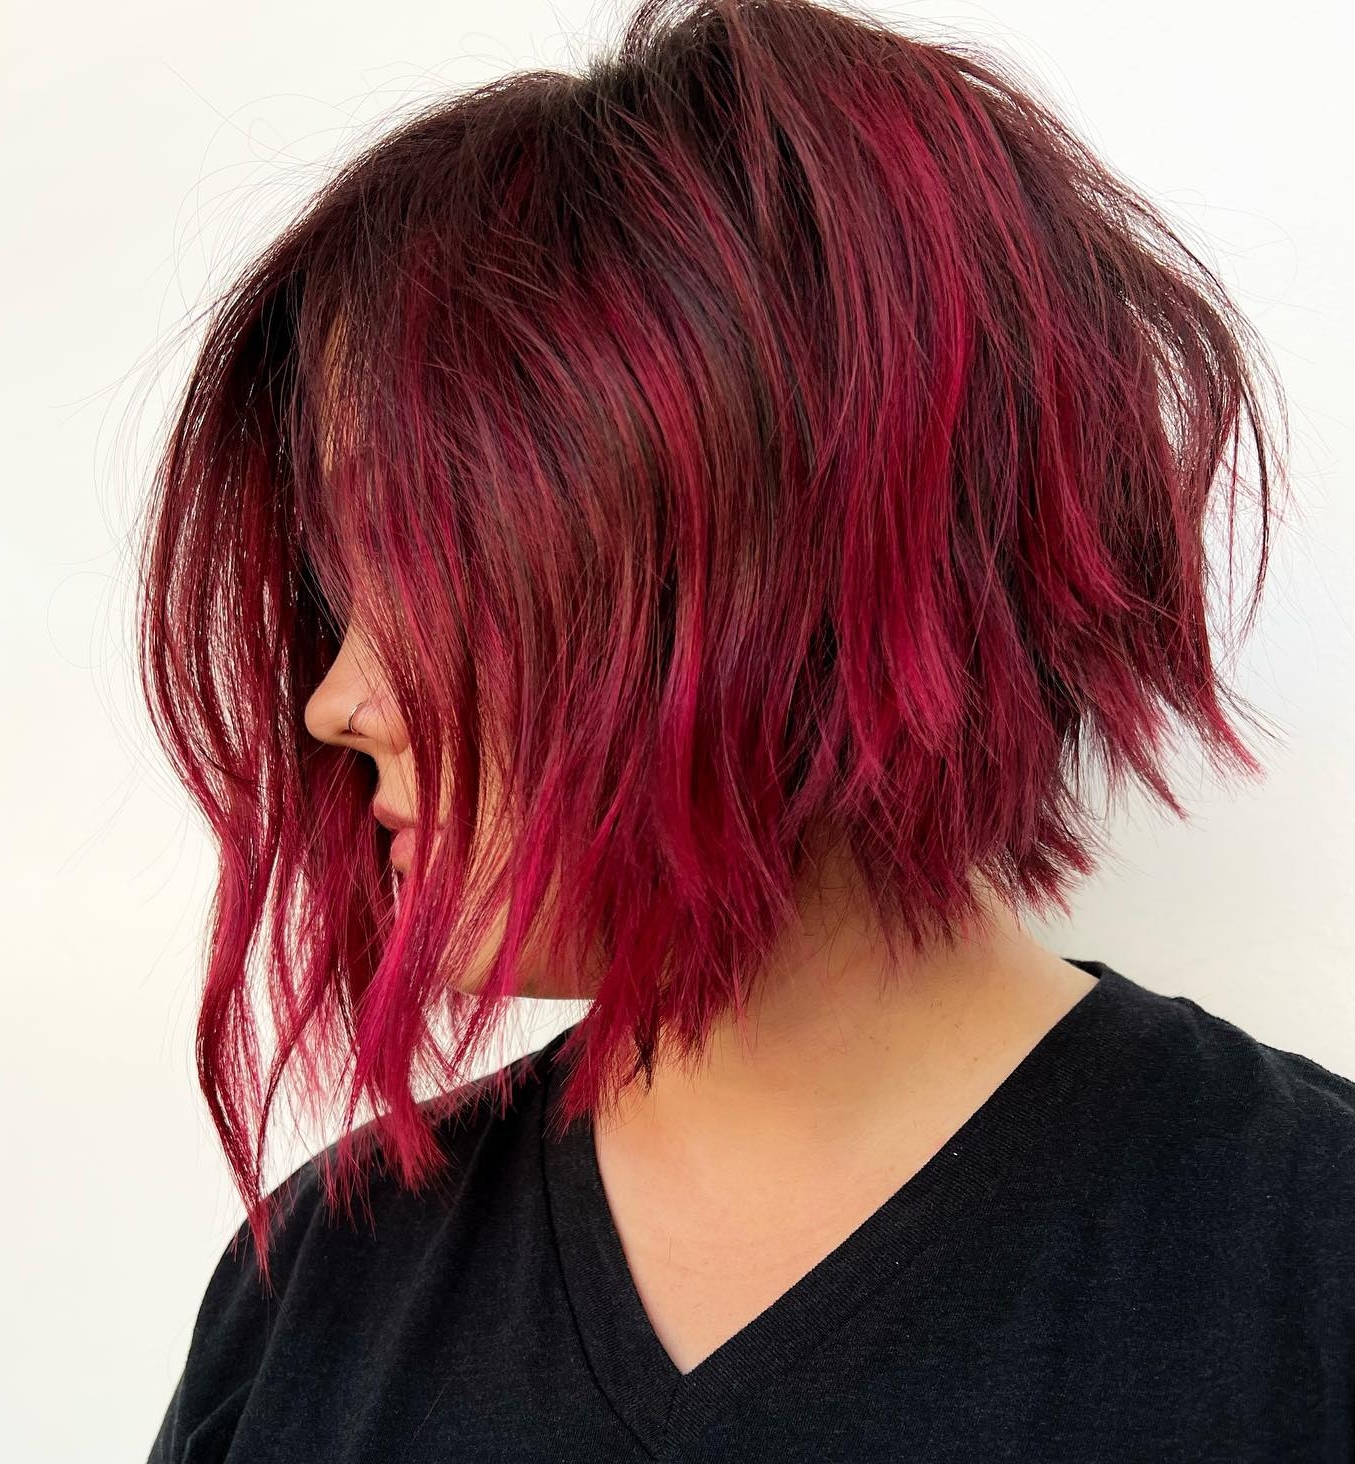 Feathered Wavy Bob Cut on Red Hair